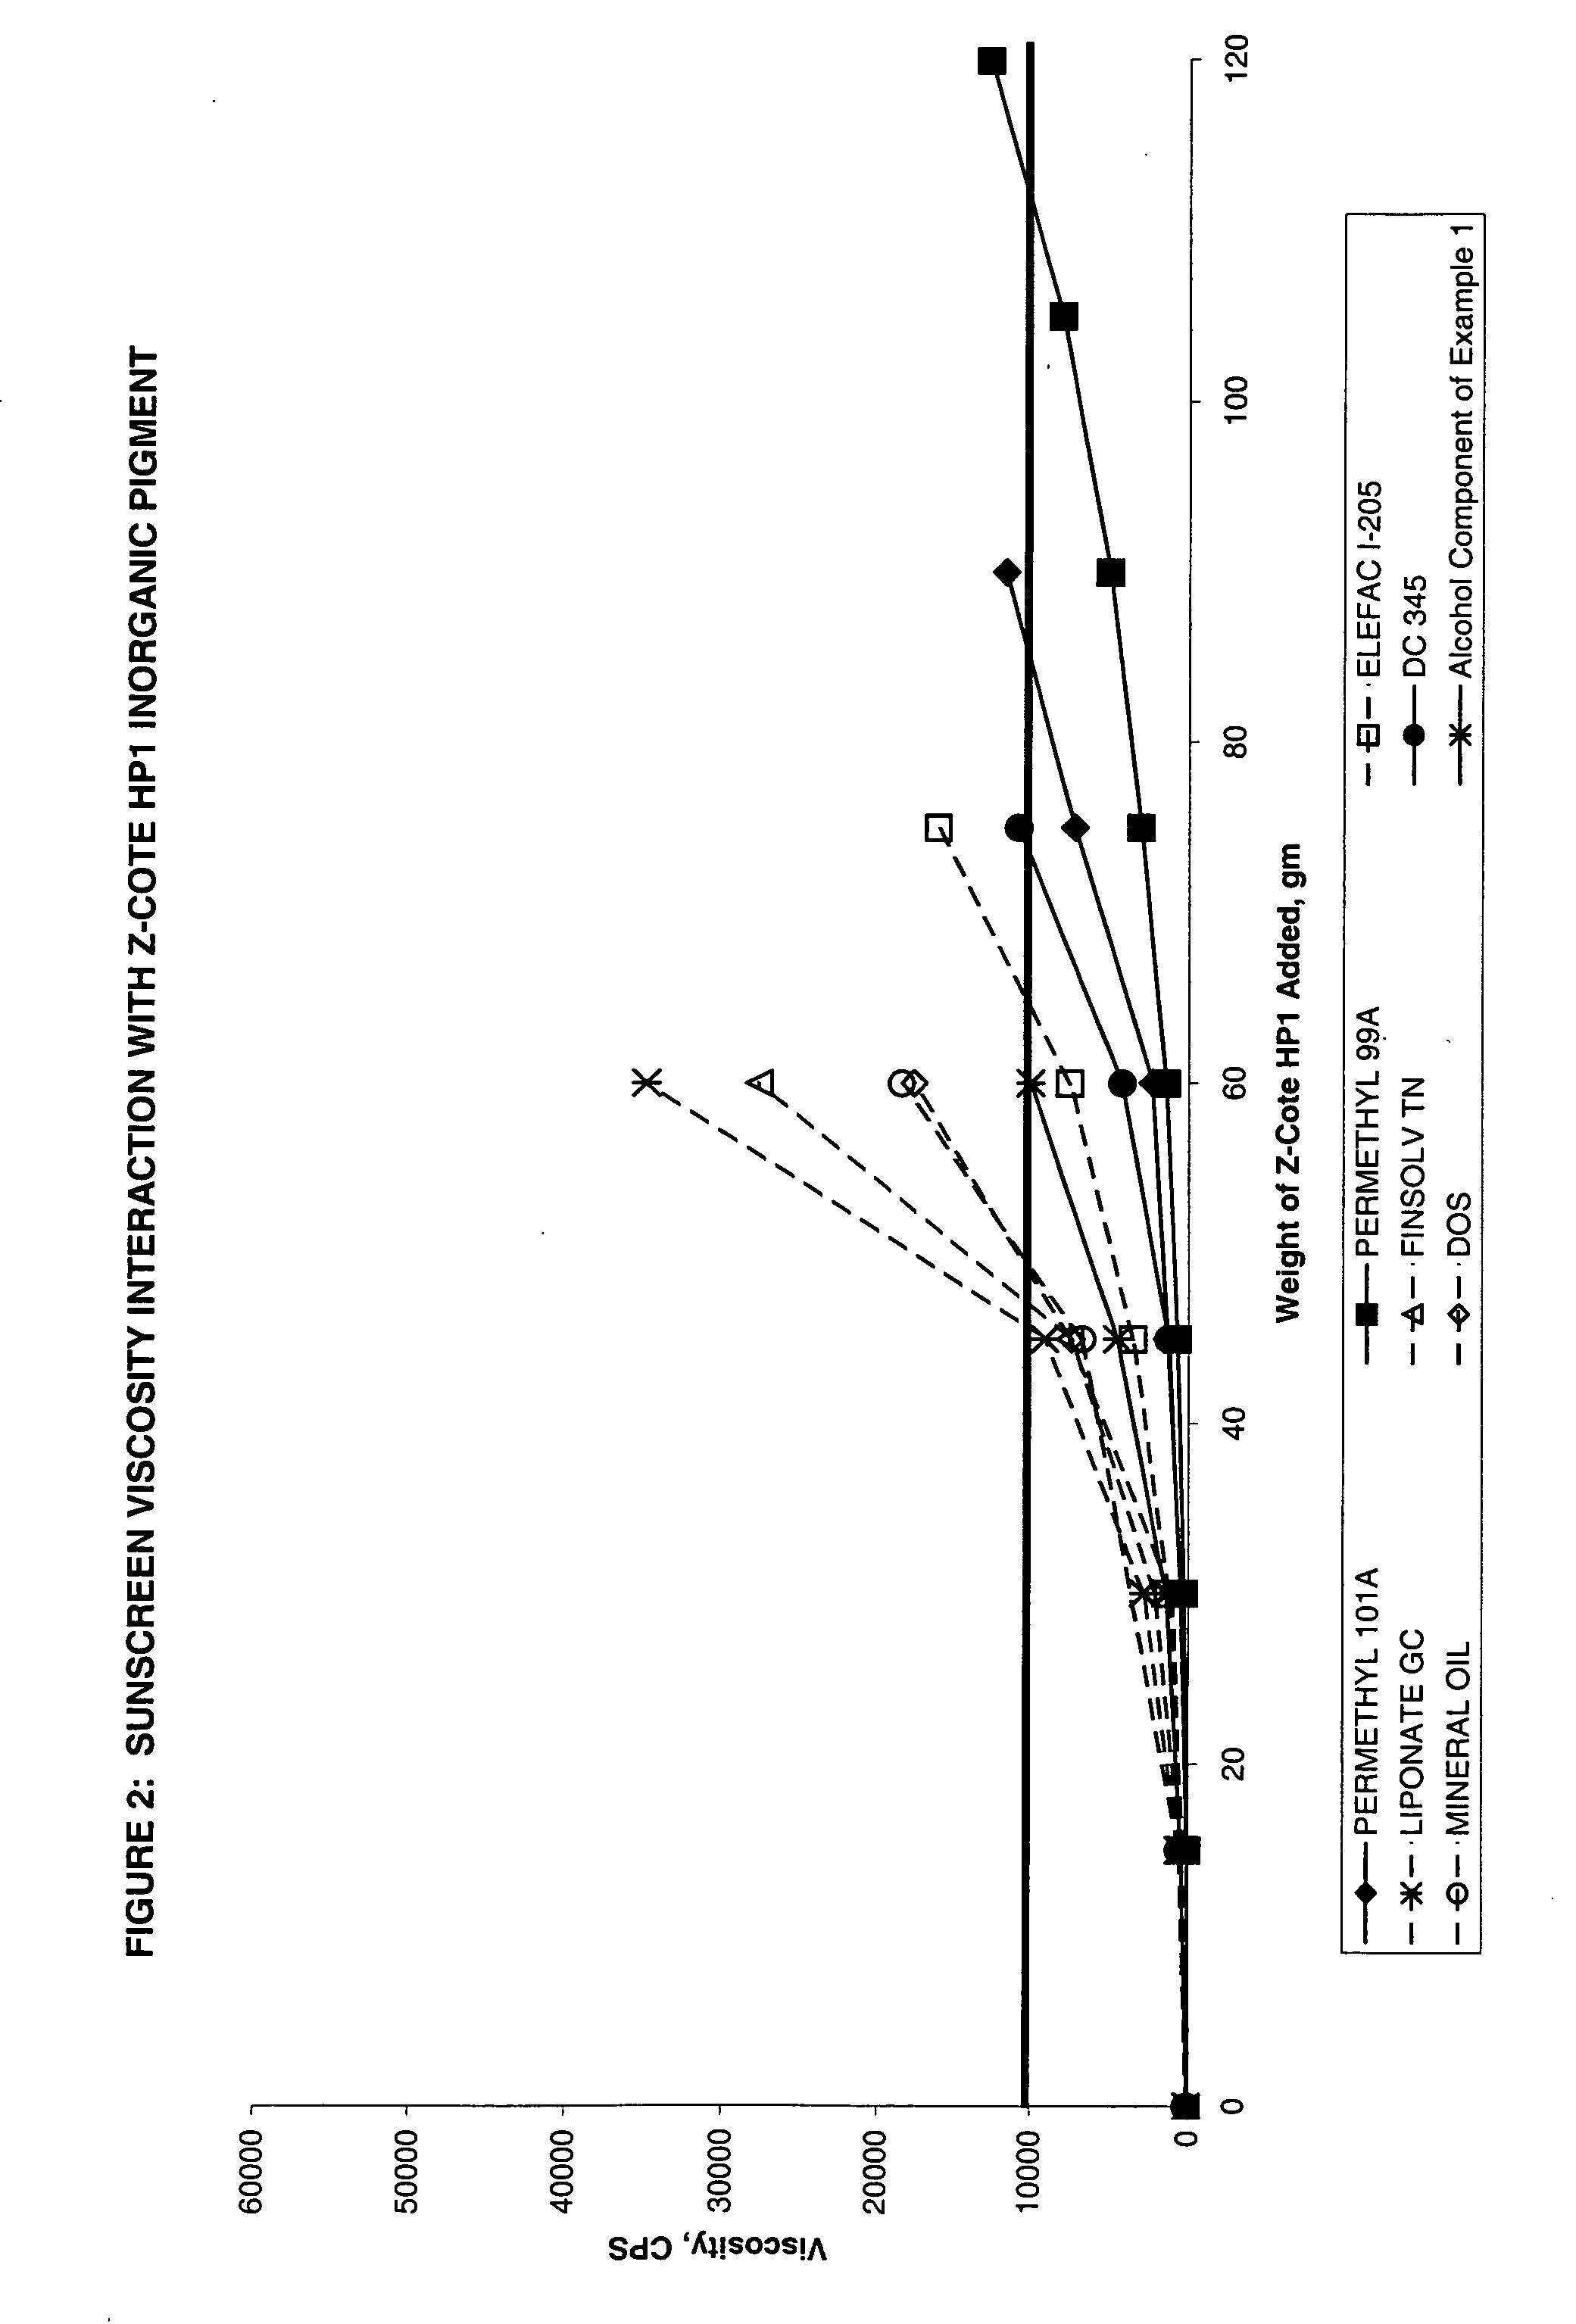 Personal care compositions containing highly branched primary alcohol component